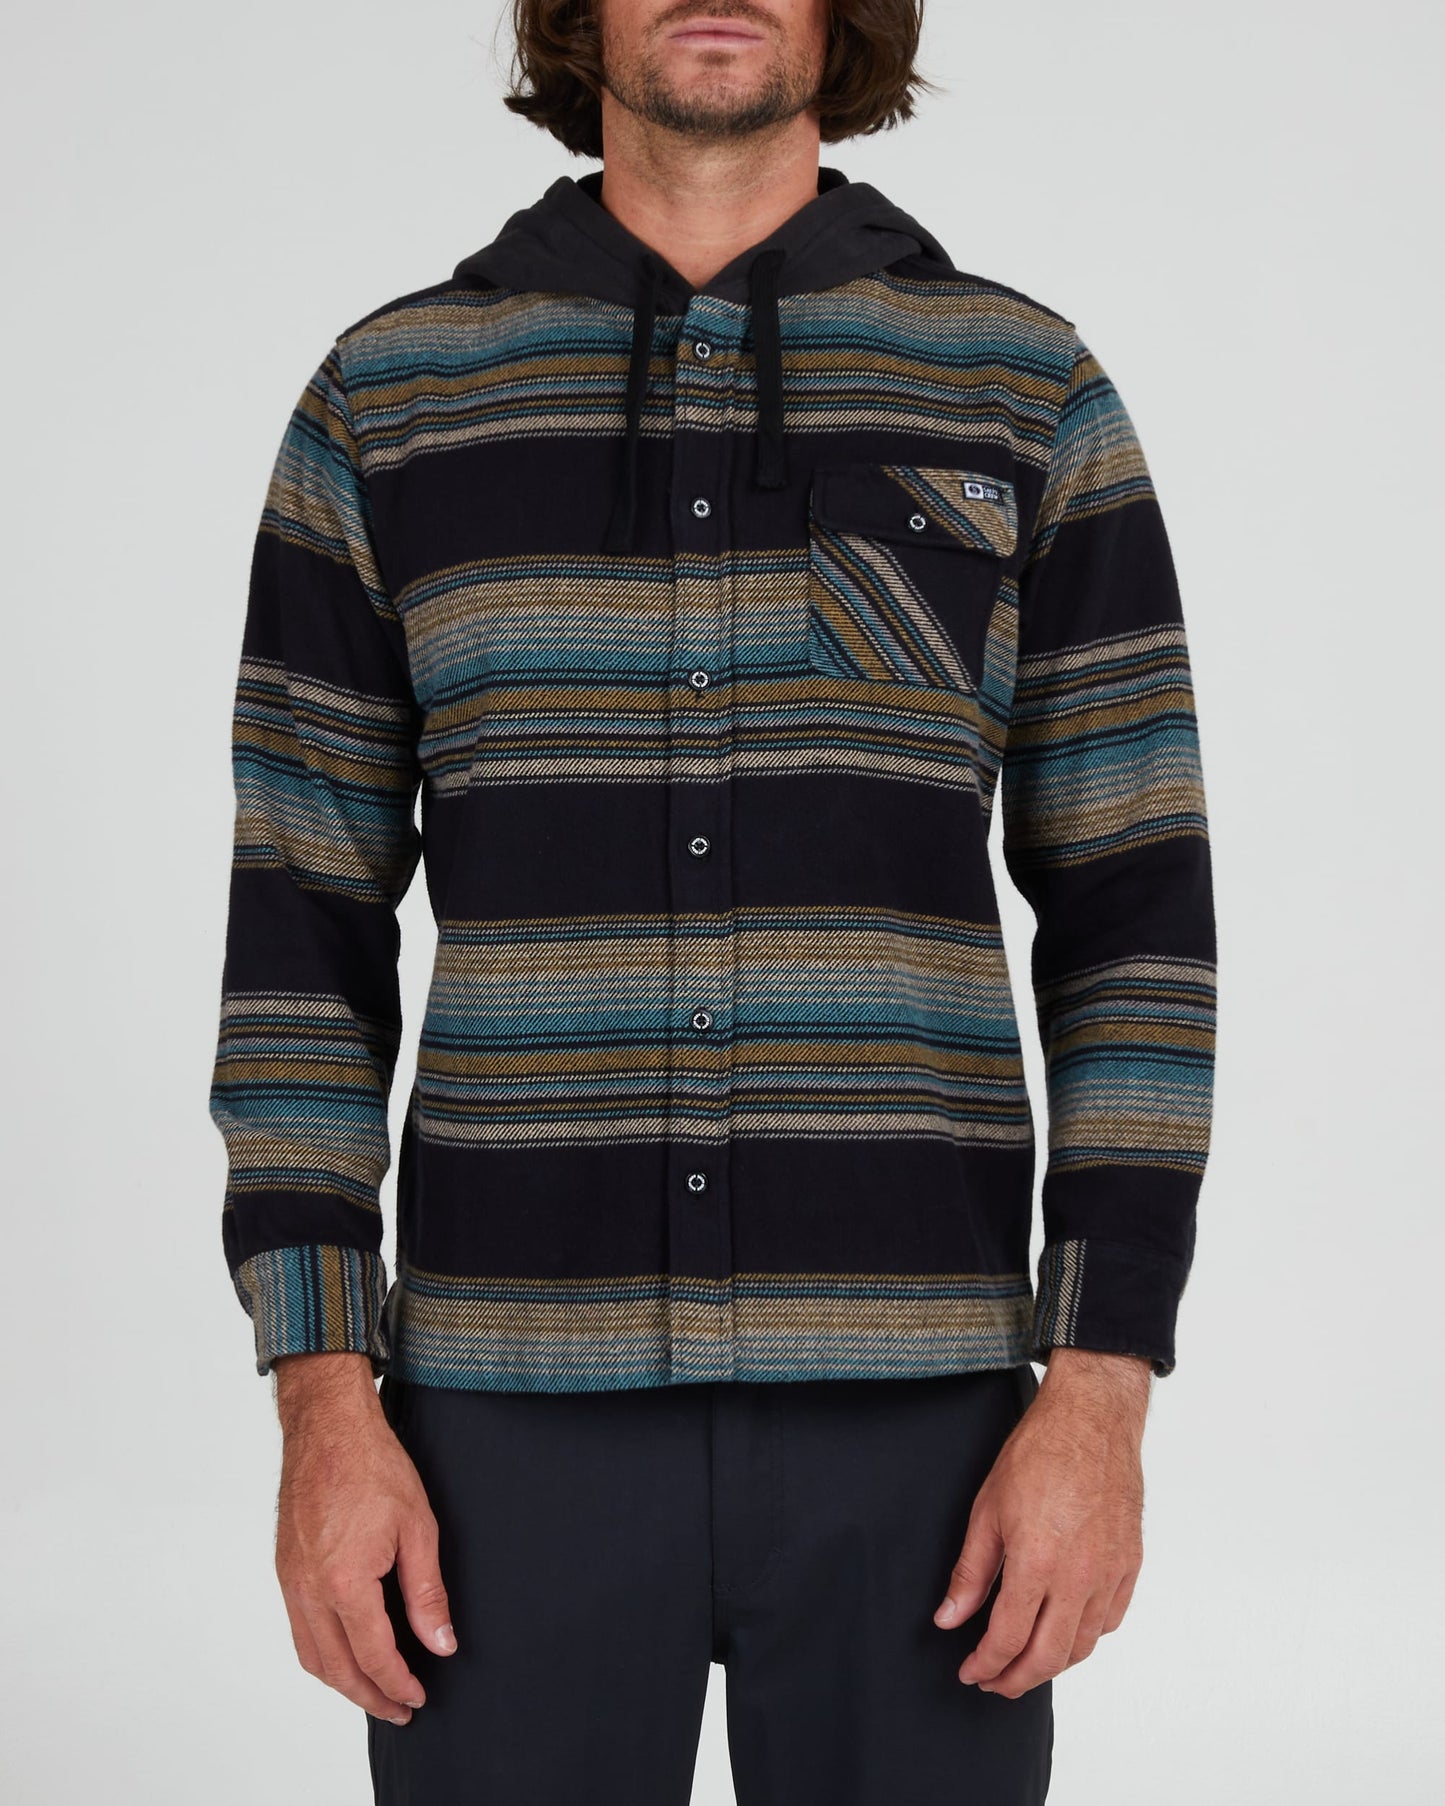 Salty crew WOVEN SHIRTS OUTSKIRTS FLANNEL - Black in Black